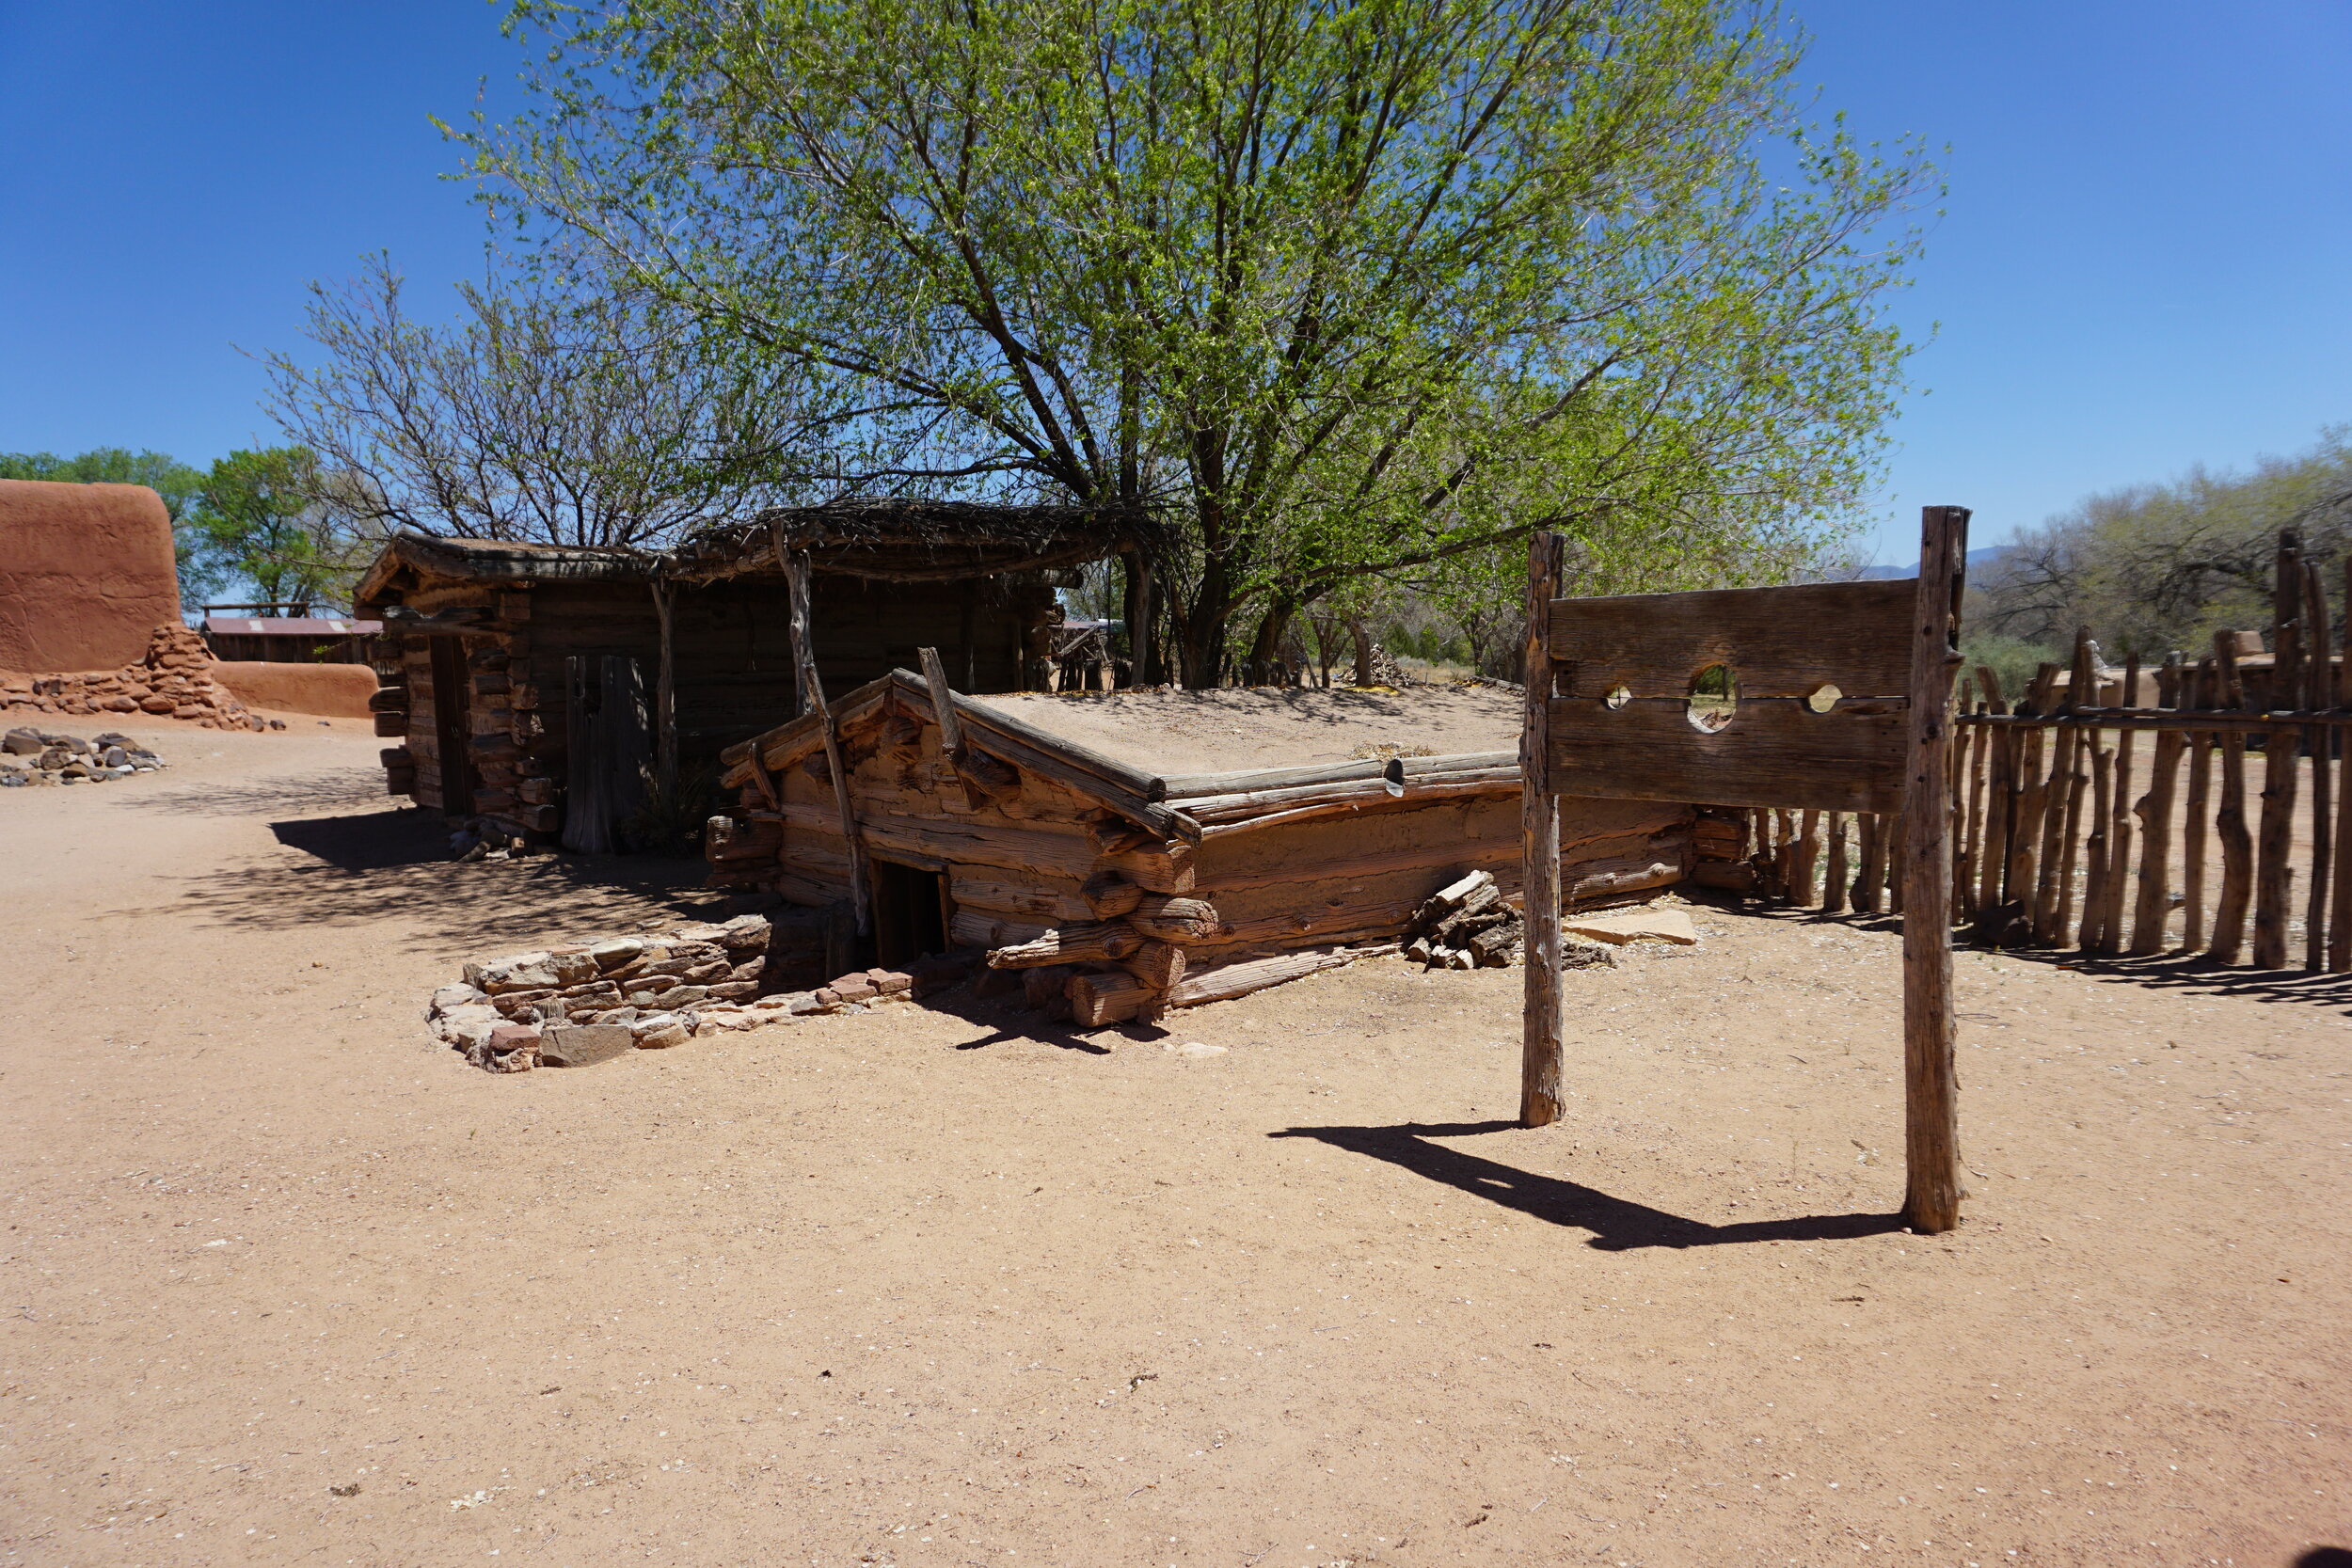 Grounds of a historic ranch in Santa Fe, New Mexico